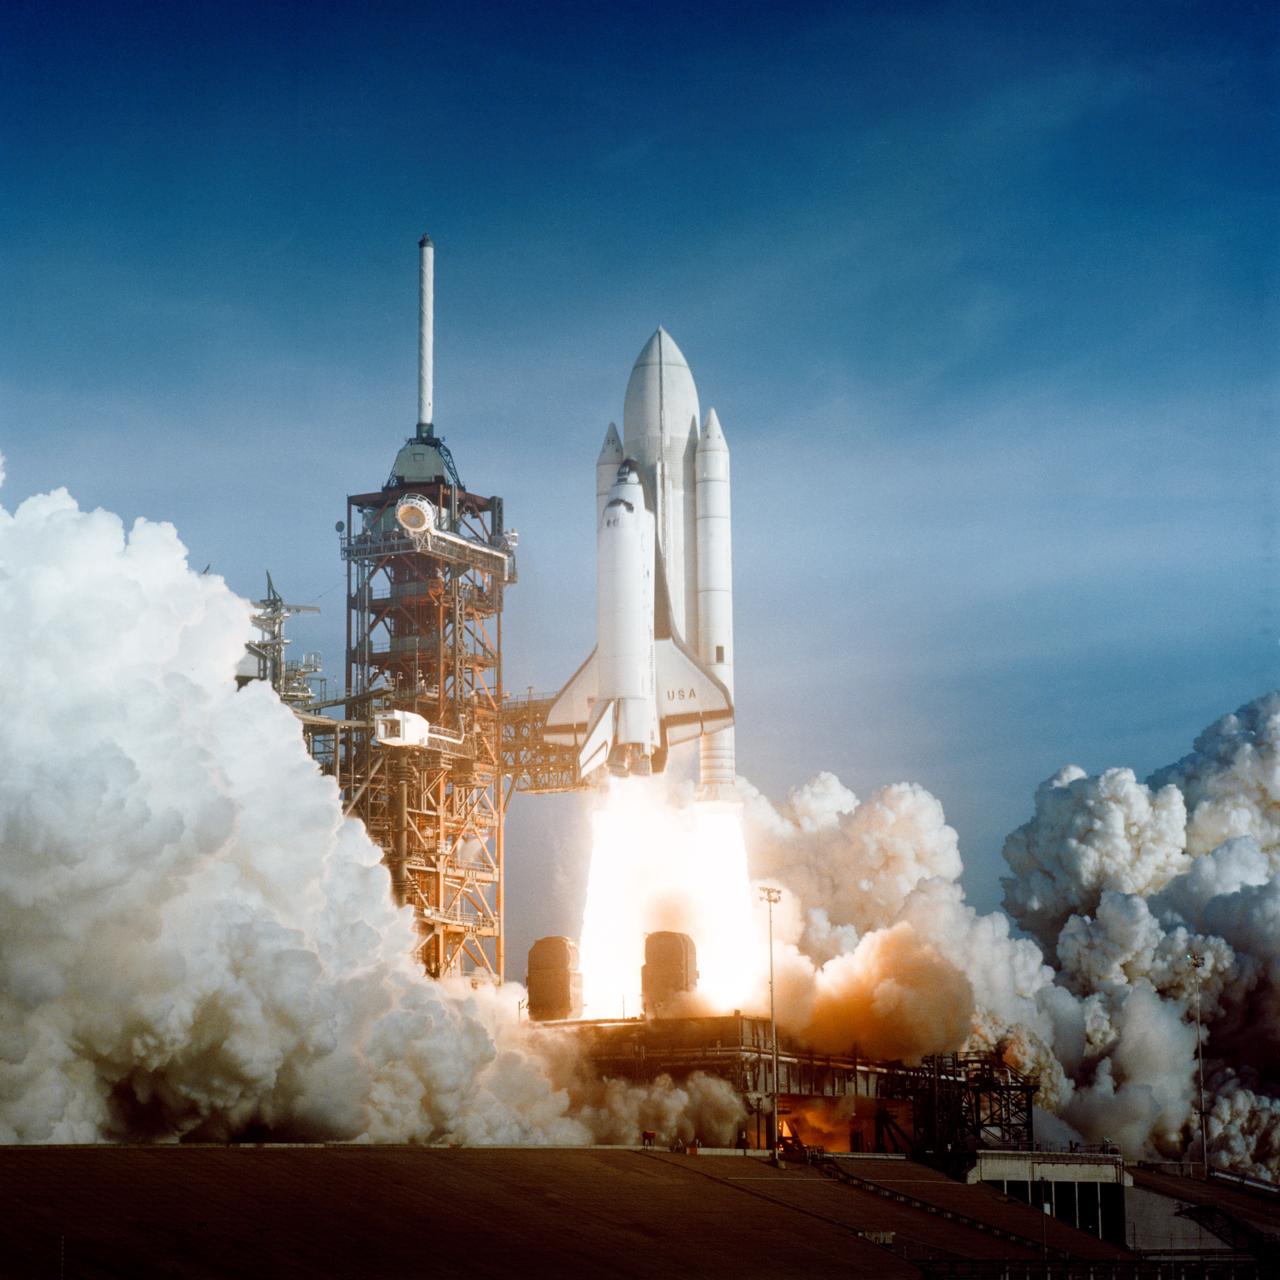 Space shuttle Columbia's STS-1 mission launches April 12, 1981. 